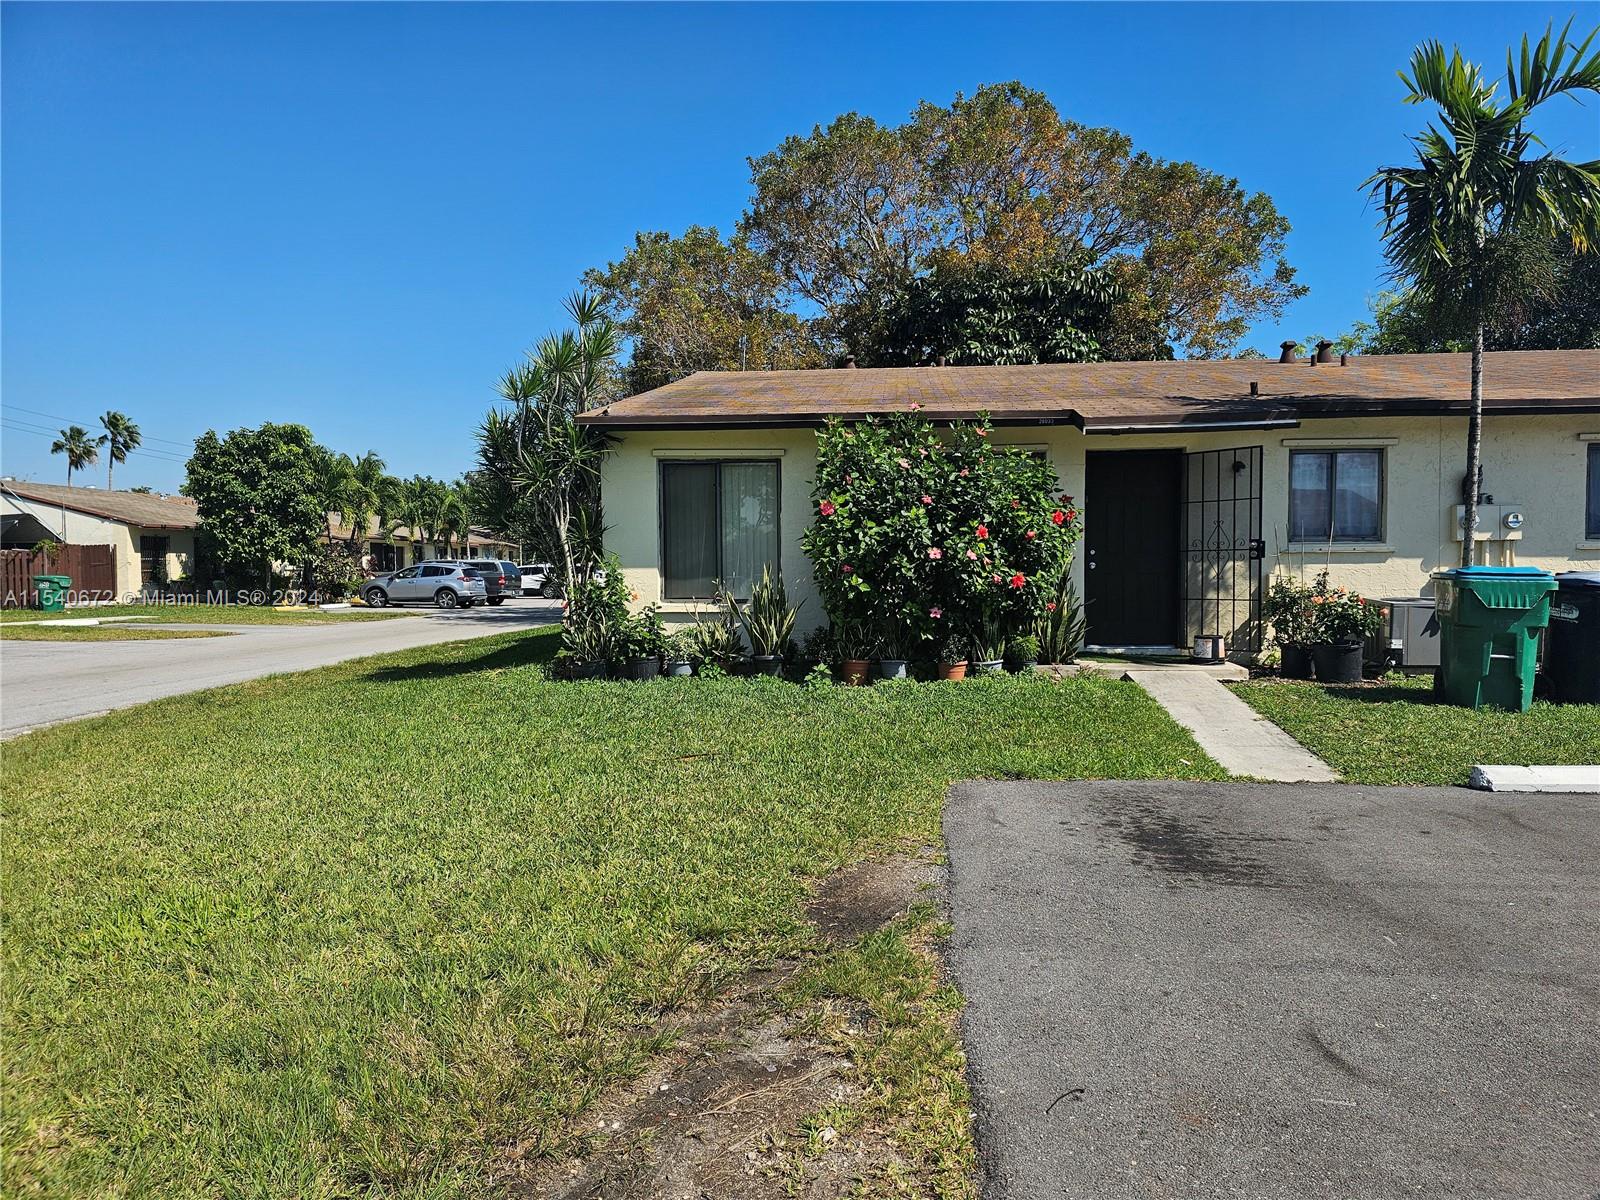 Incredible opportunity at Leisure City in Homestead, for 1st buyers/investors. This unit is a CORNER single story house featuring 2 bedrooms and 1-1/2 bathrooms. Very low taxes and an association fee. 2 parking spaces in front of Townhouse.
Near shopping center and 11 mins from Homestead Air Reserve, Wallmart and schools. Don't miss this
opportunitty !